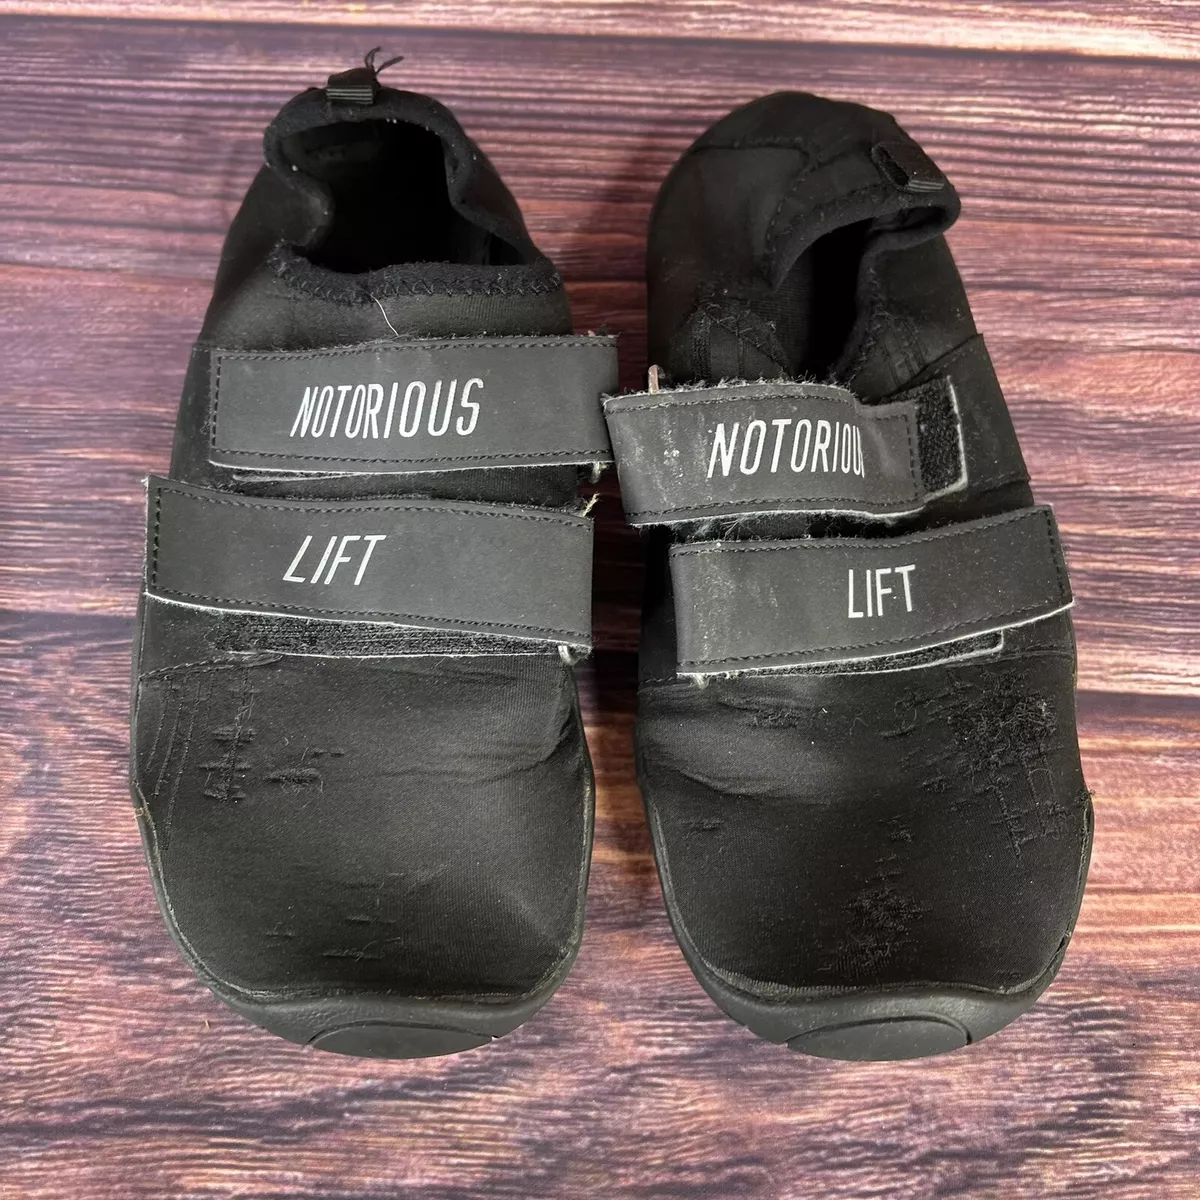 The Perfect Deadlift Slippers? - Notorious Lifters Review - YouTube